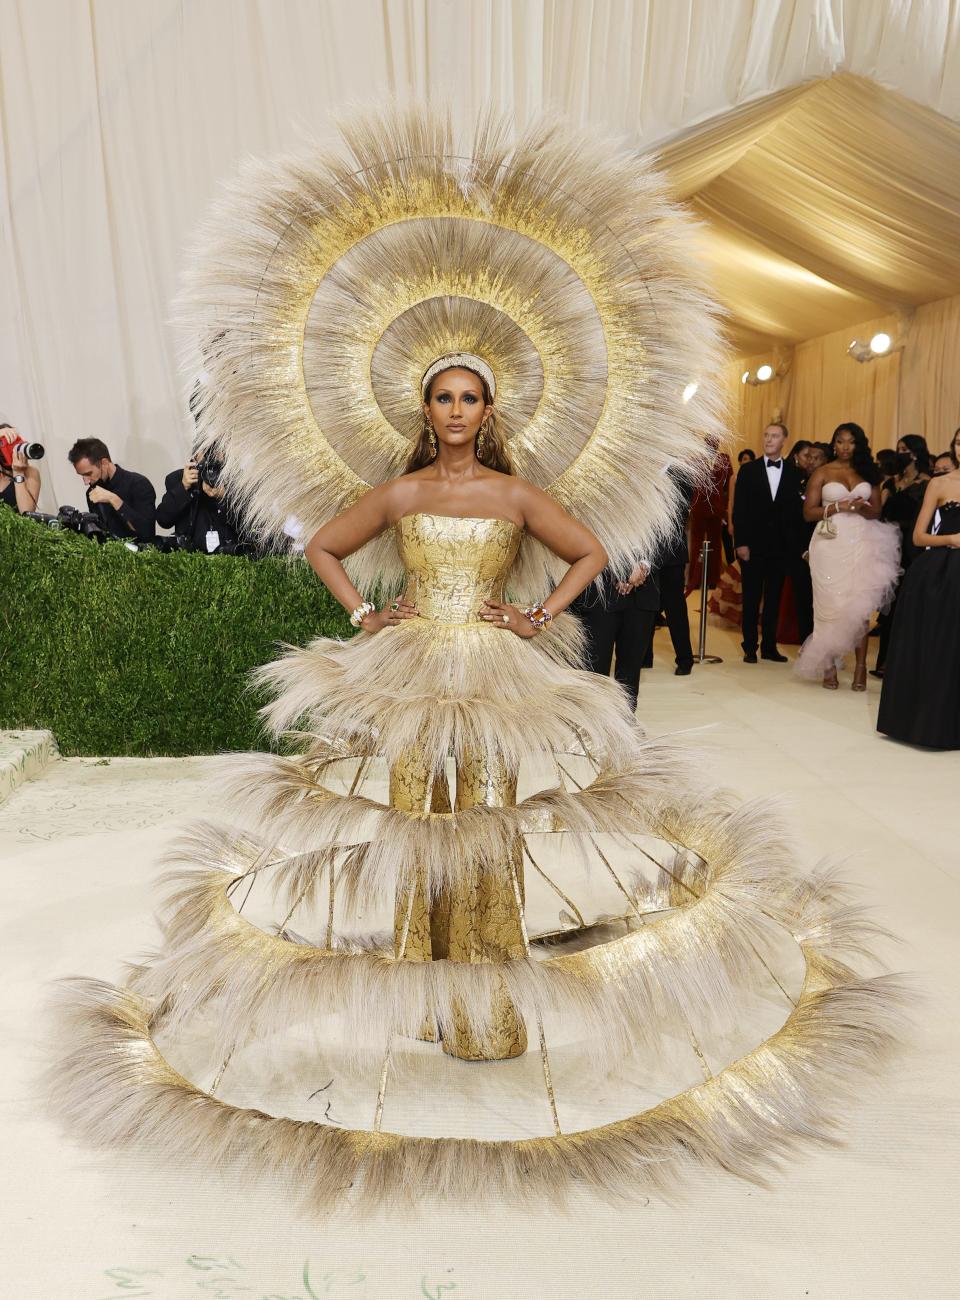 Iman wears Dolce and Gabbana by Harris Reed at the 2021 Met Gala. Around the same time of the gala Dolce & Gabbana was suing fashion blogger Diet Prada after the account exposed anti-Asian messages that were attributed to one of the label's designers.